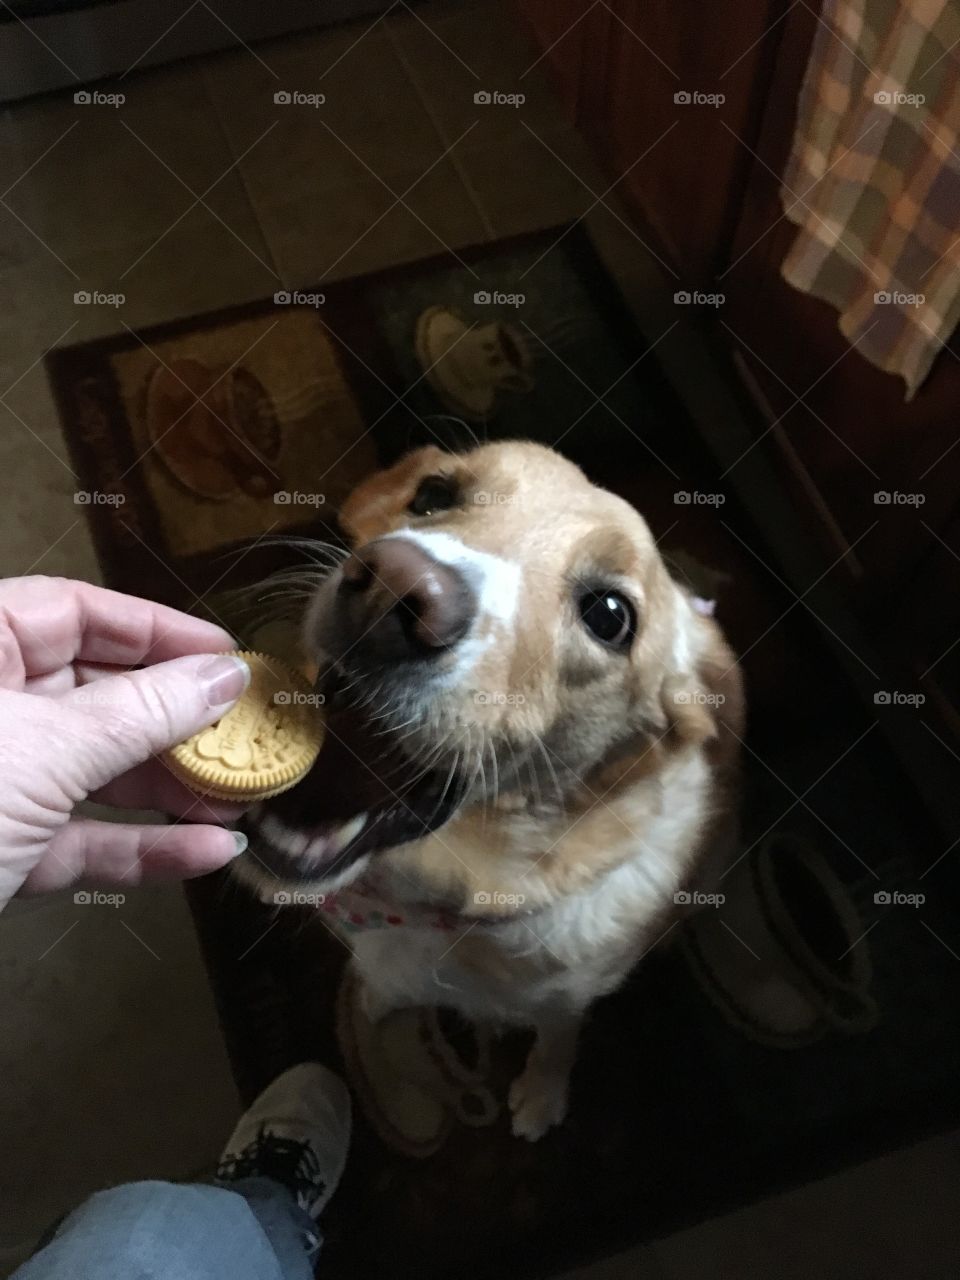 Yes, I would like cookie!!! 